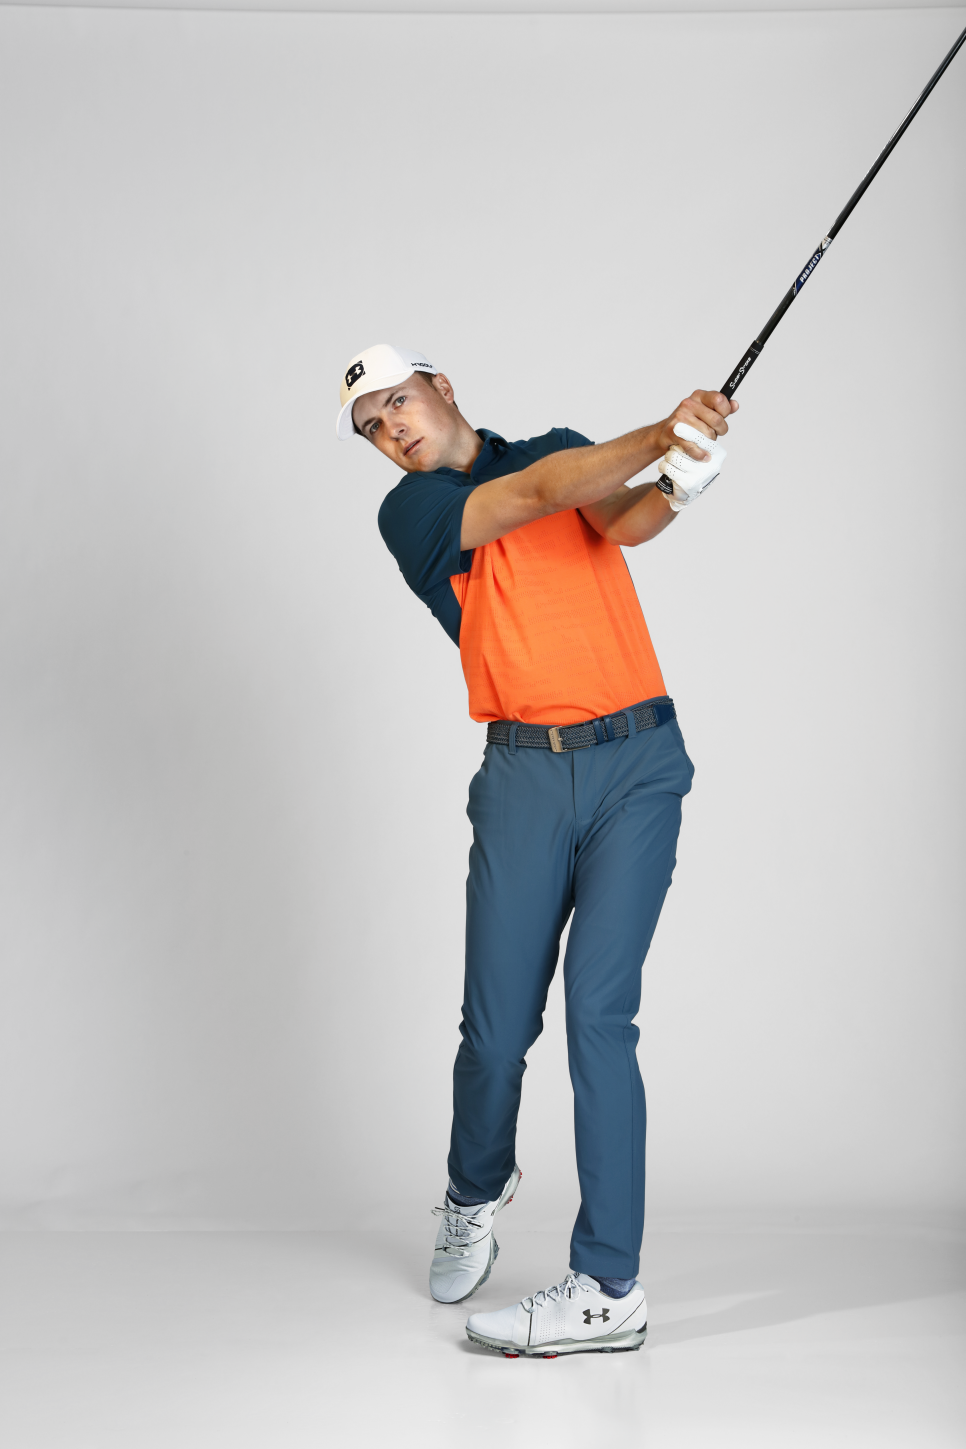 GD040119_INST_SPIETH4.png